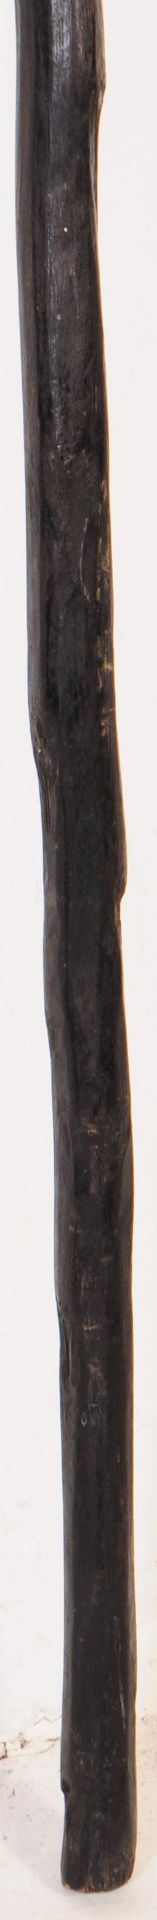 EARLY 20TH CENTURY AFRICAN FISHING SPEAR - Image 4 of 4